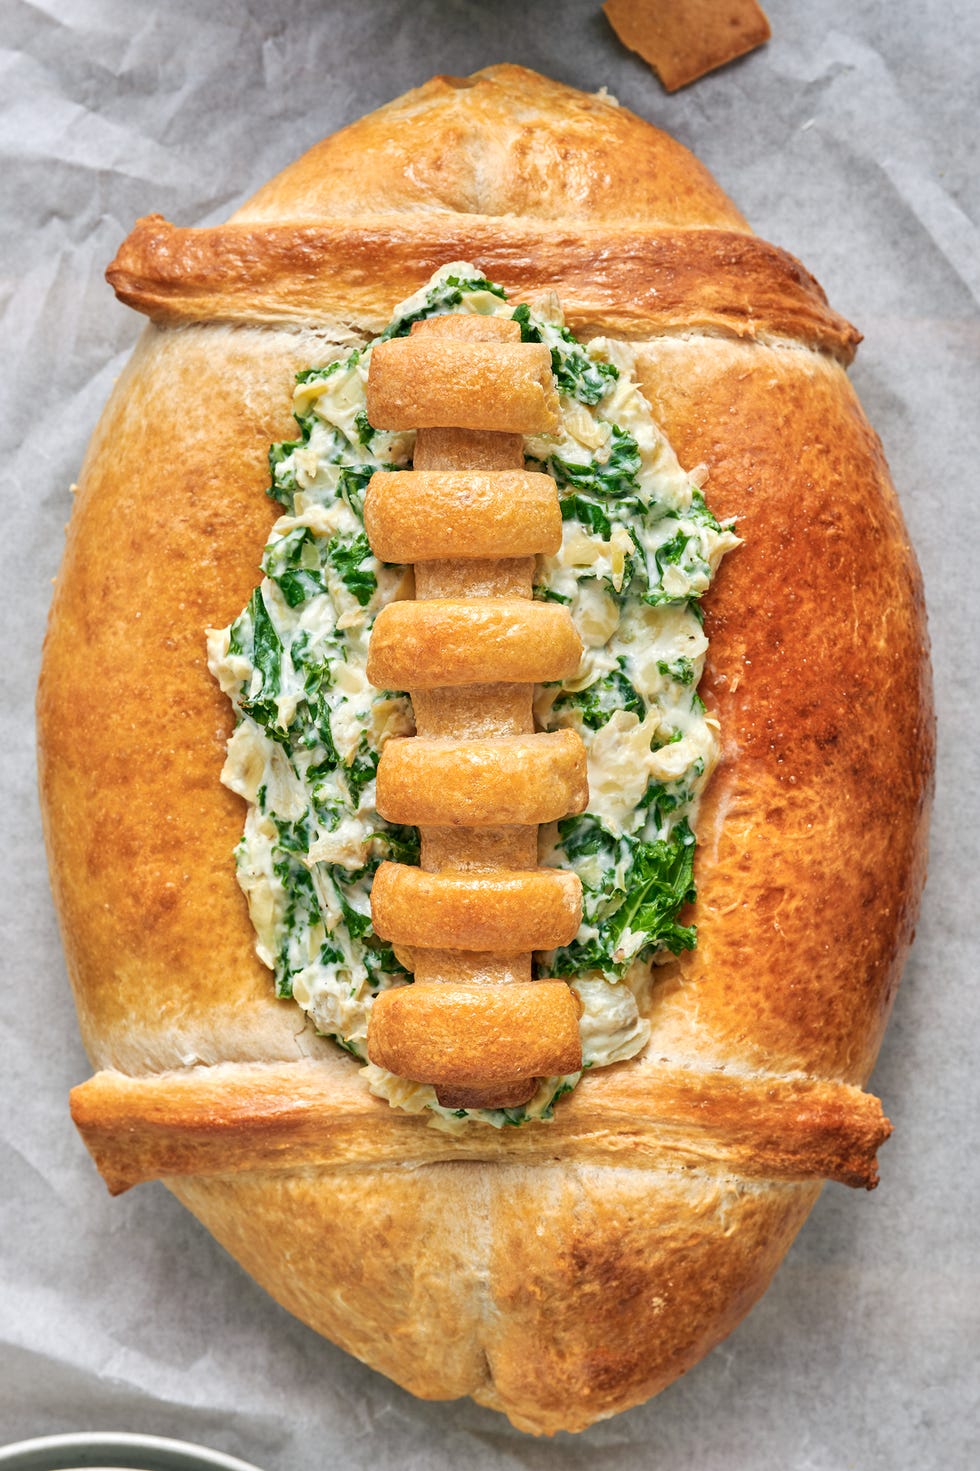 spinach and artichoke dip in a bread bowl shaped like a football